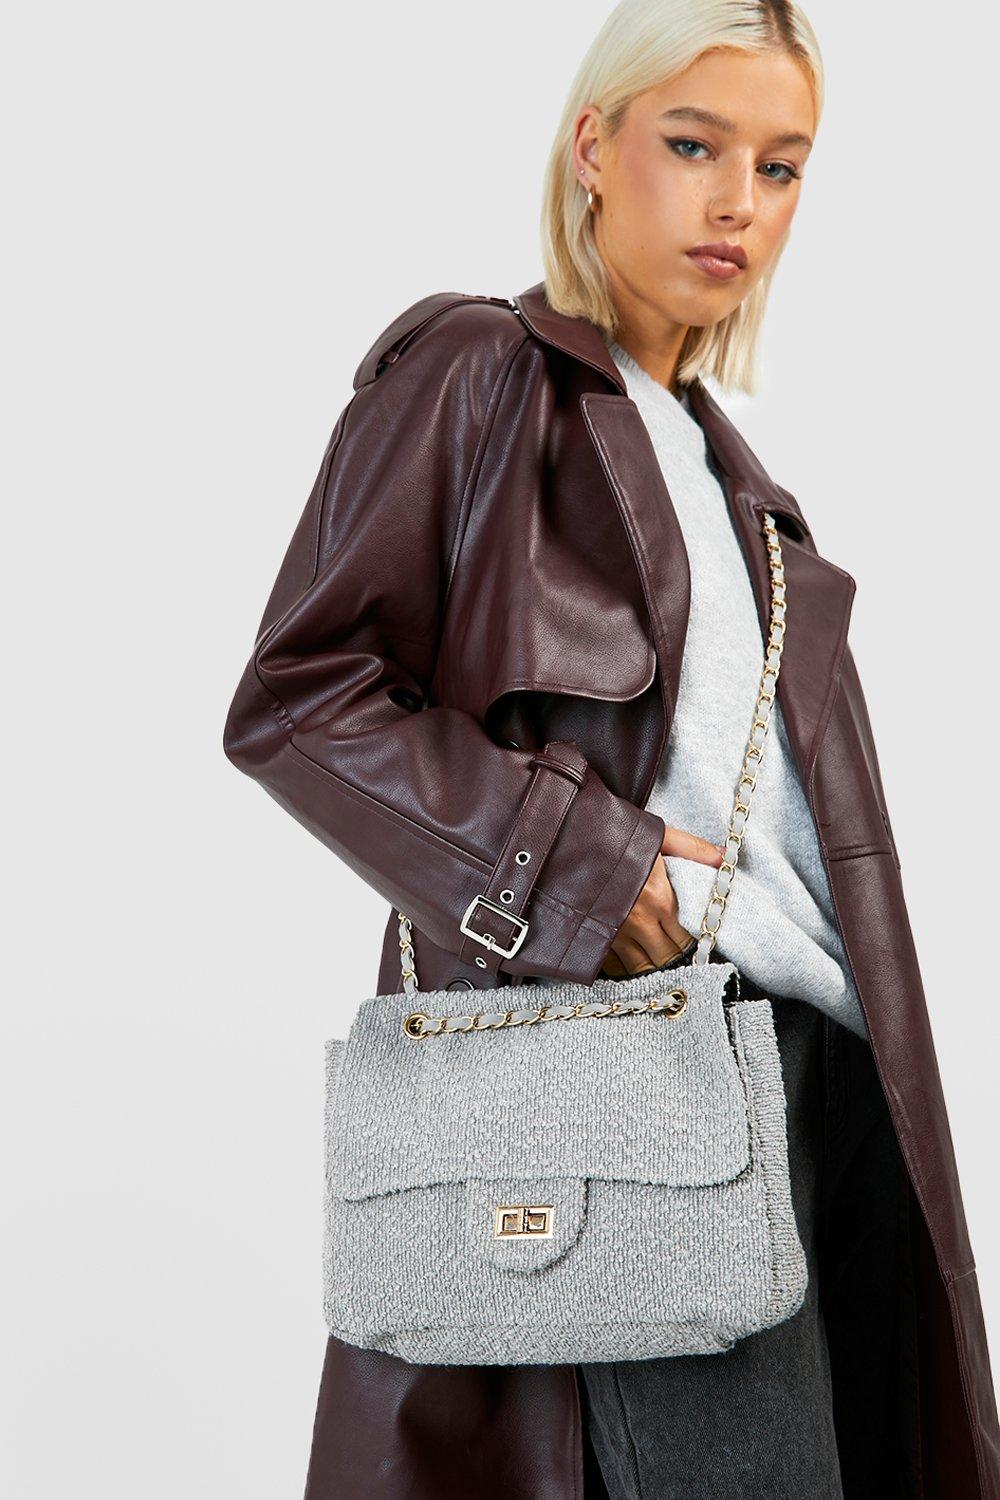 Two For One Perforated Mini Satchel With Chain